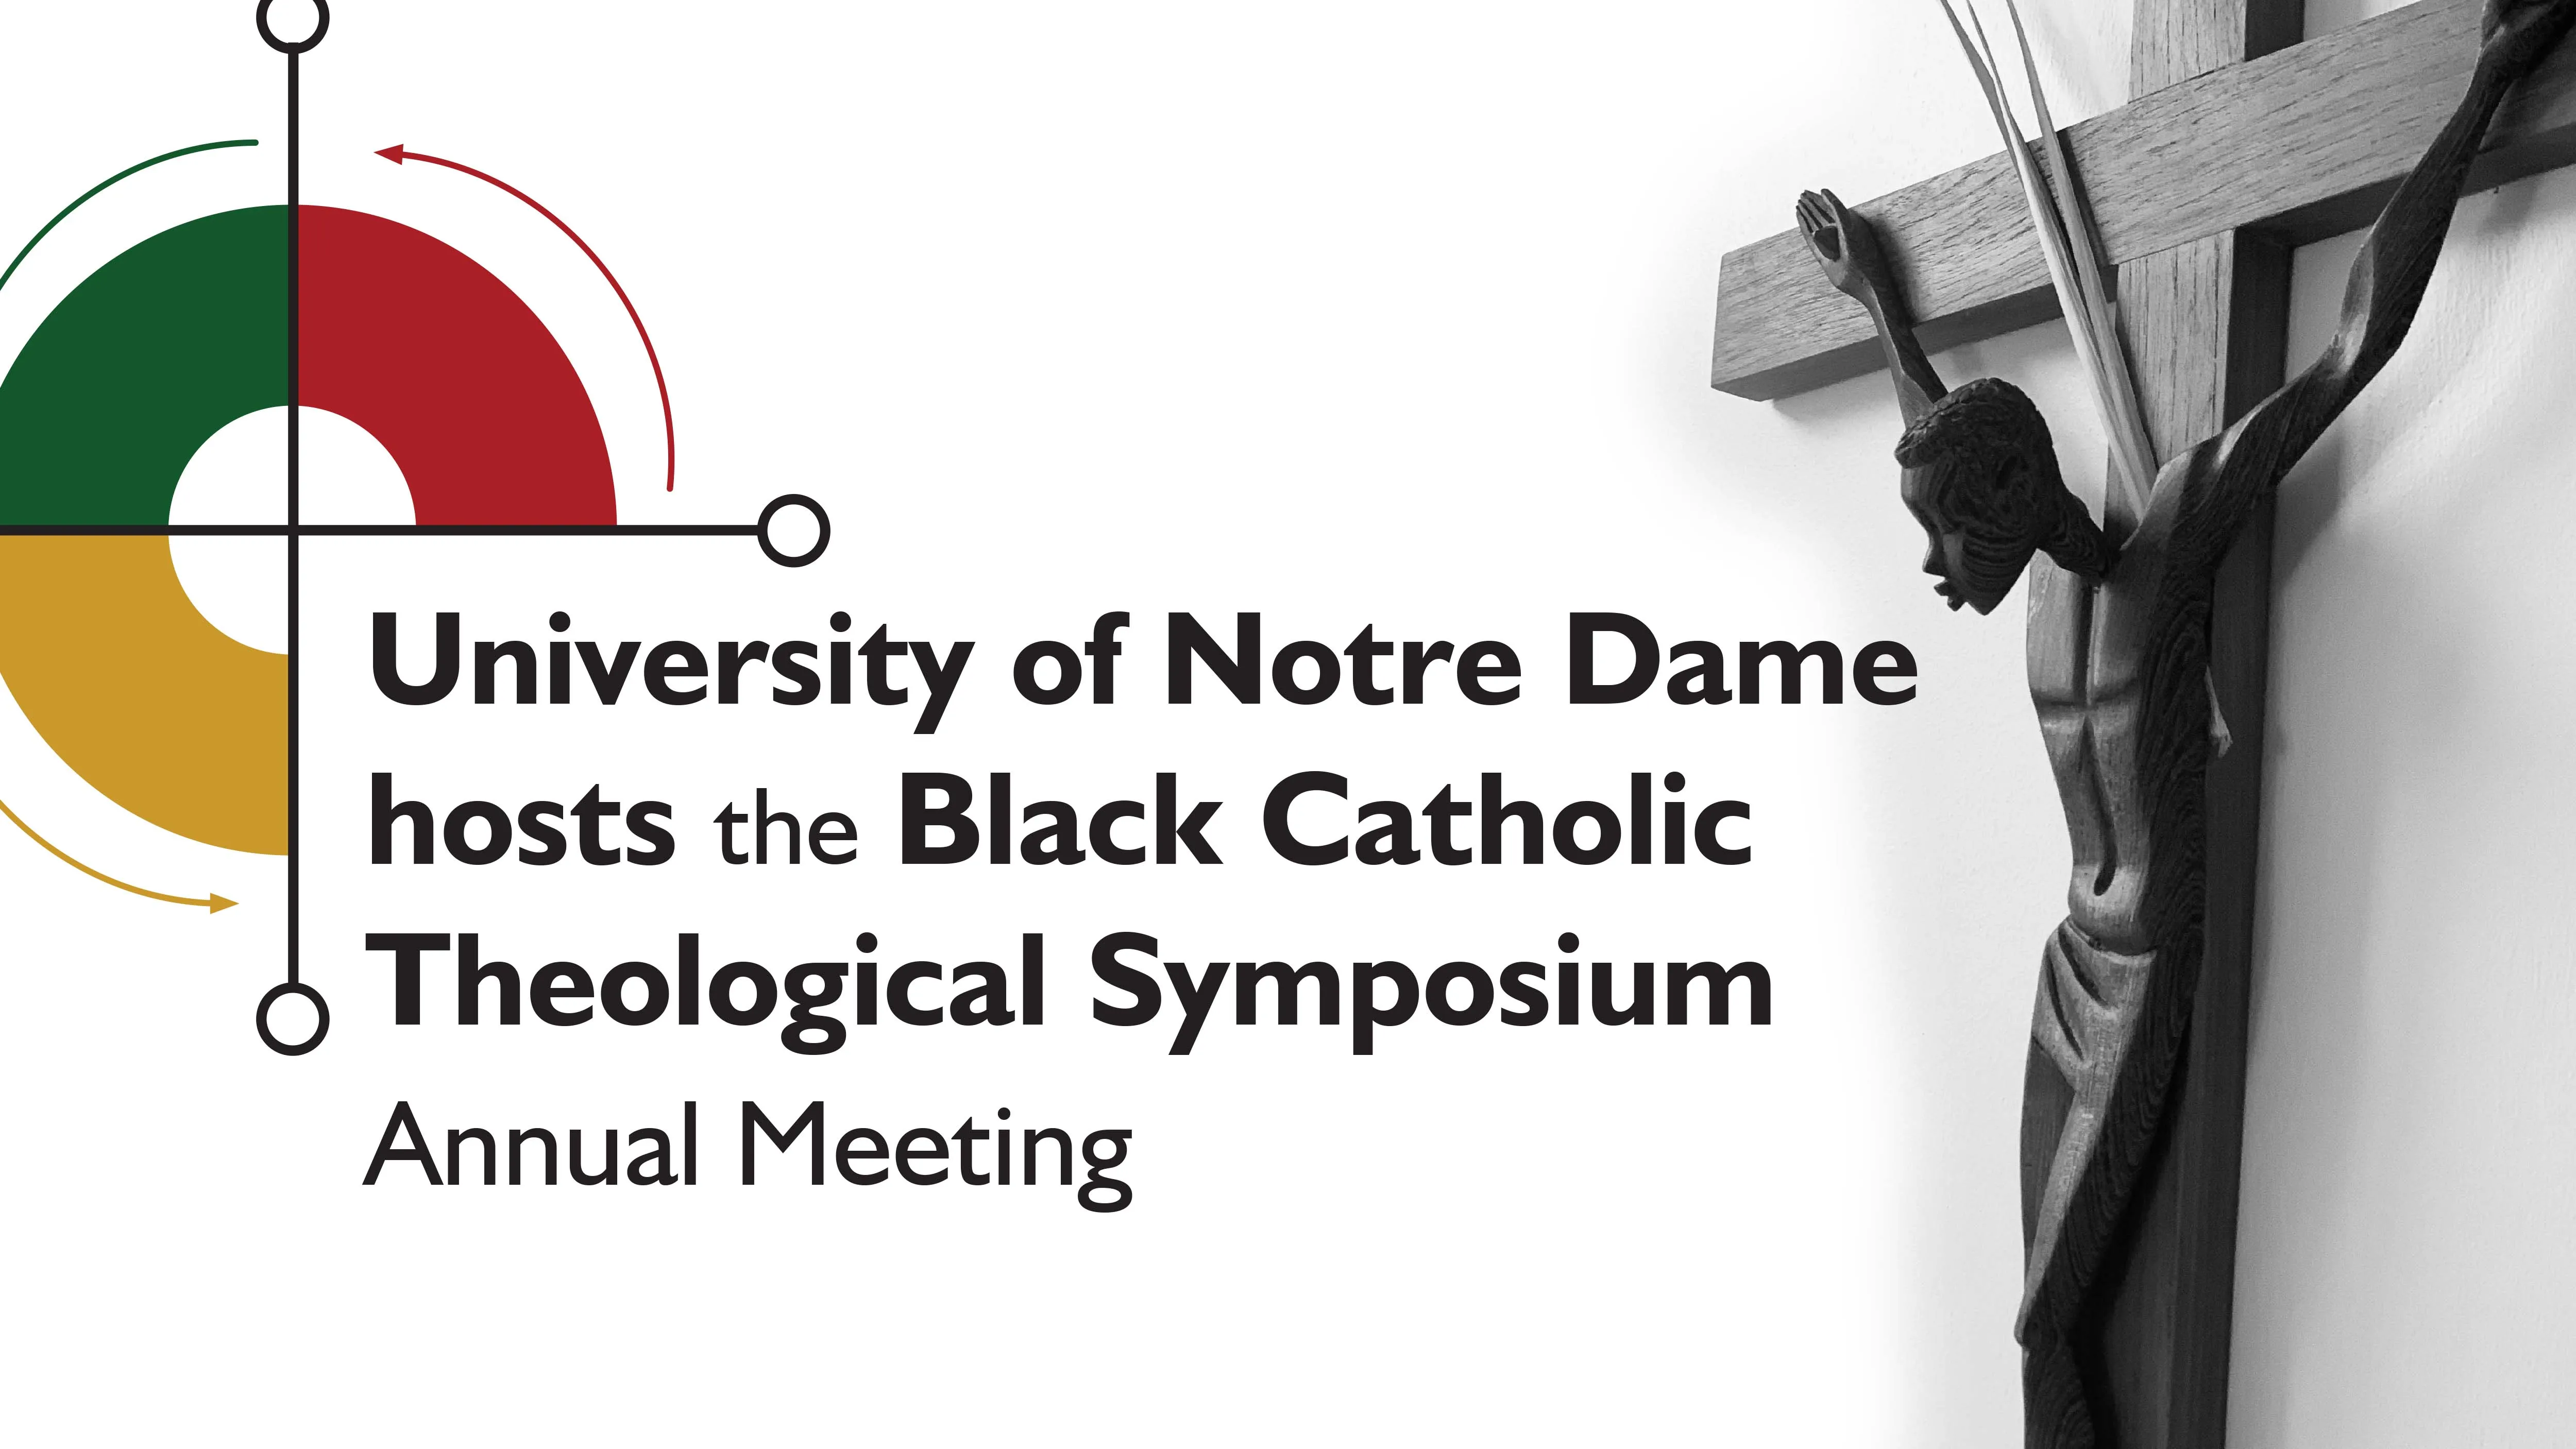 The 31st annual meeting of the Black Catholic Theological Symposium will take place Oct. 7-9 at the University of Notre Dame.?w=200&h=150